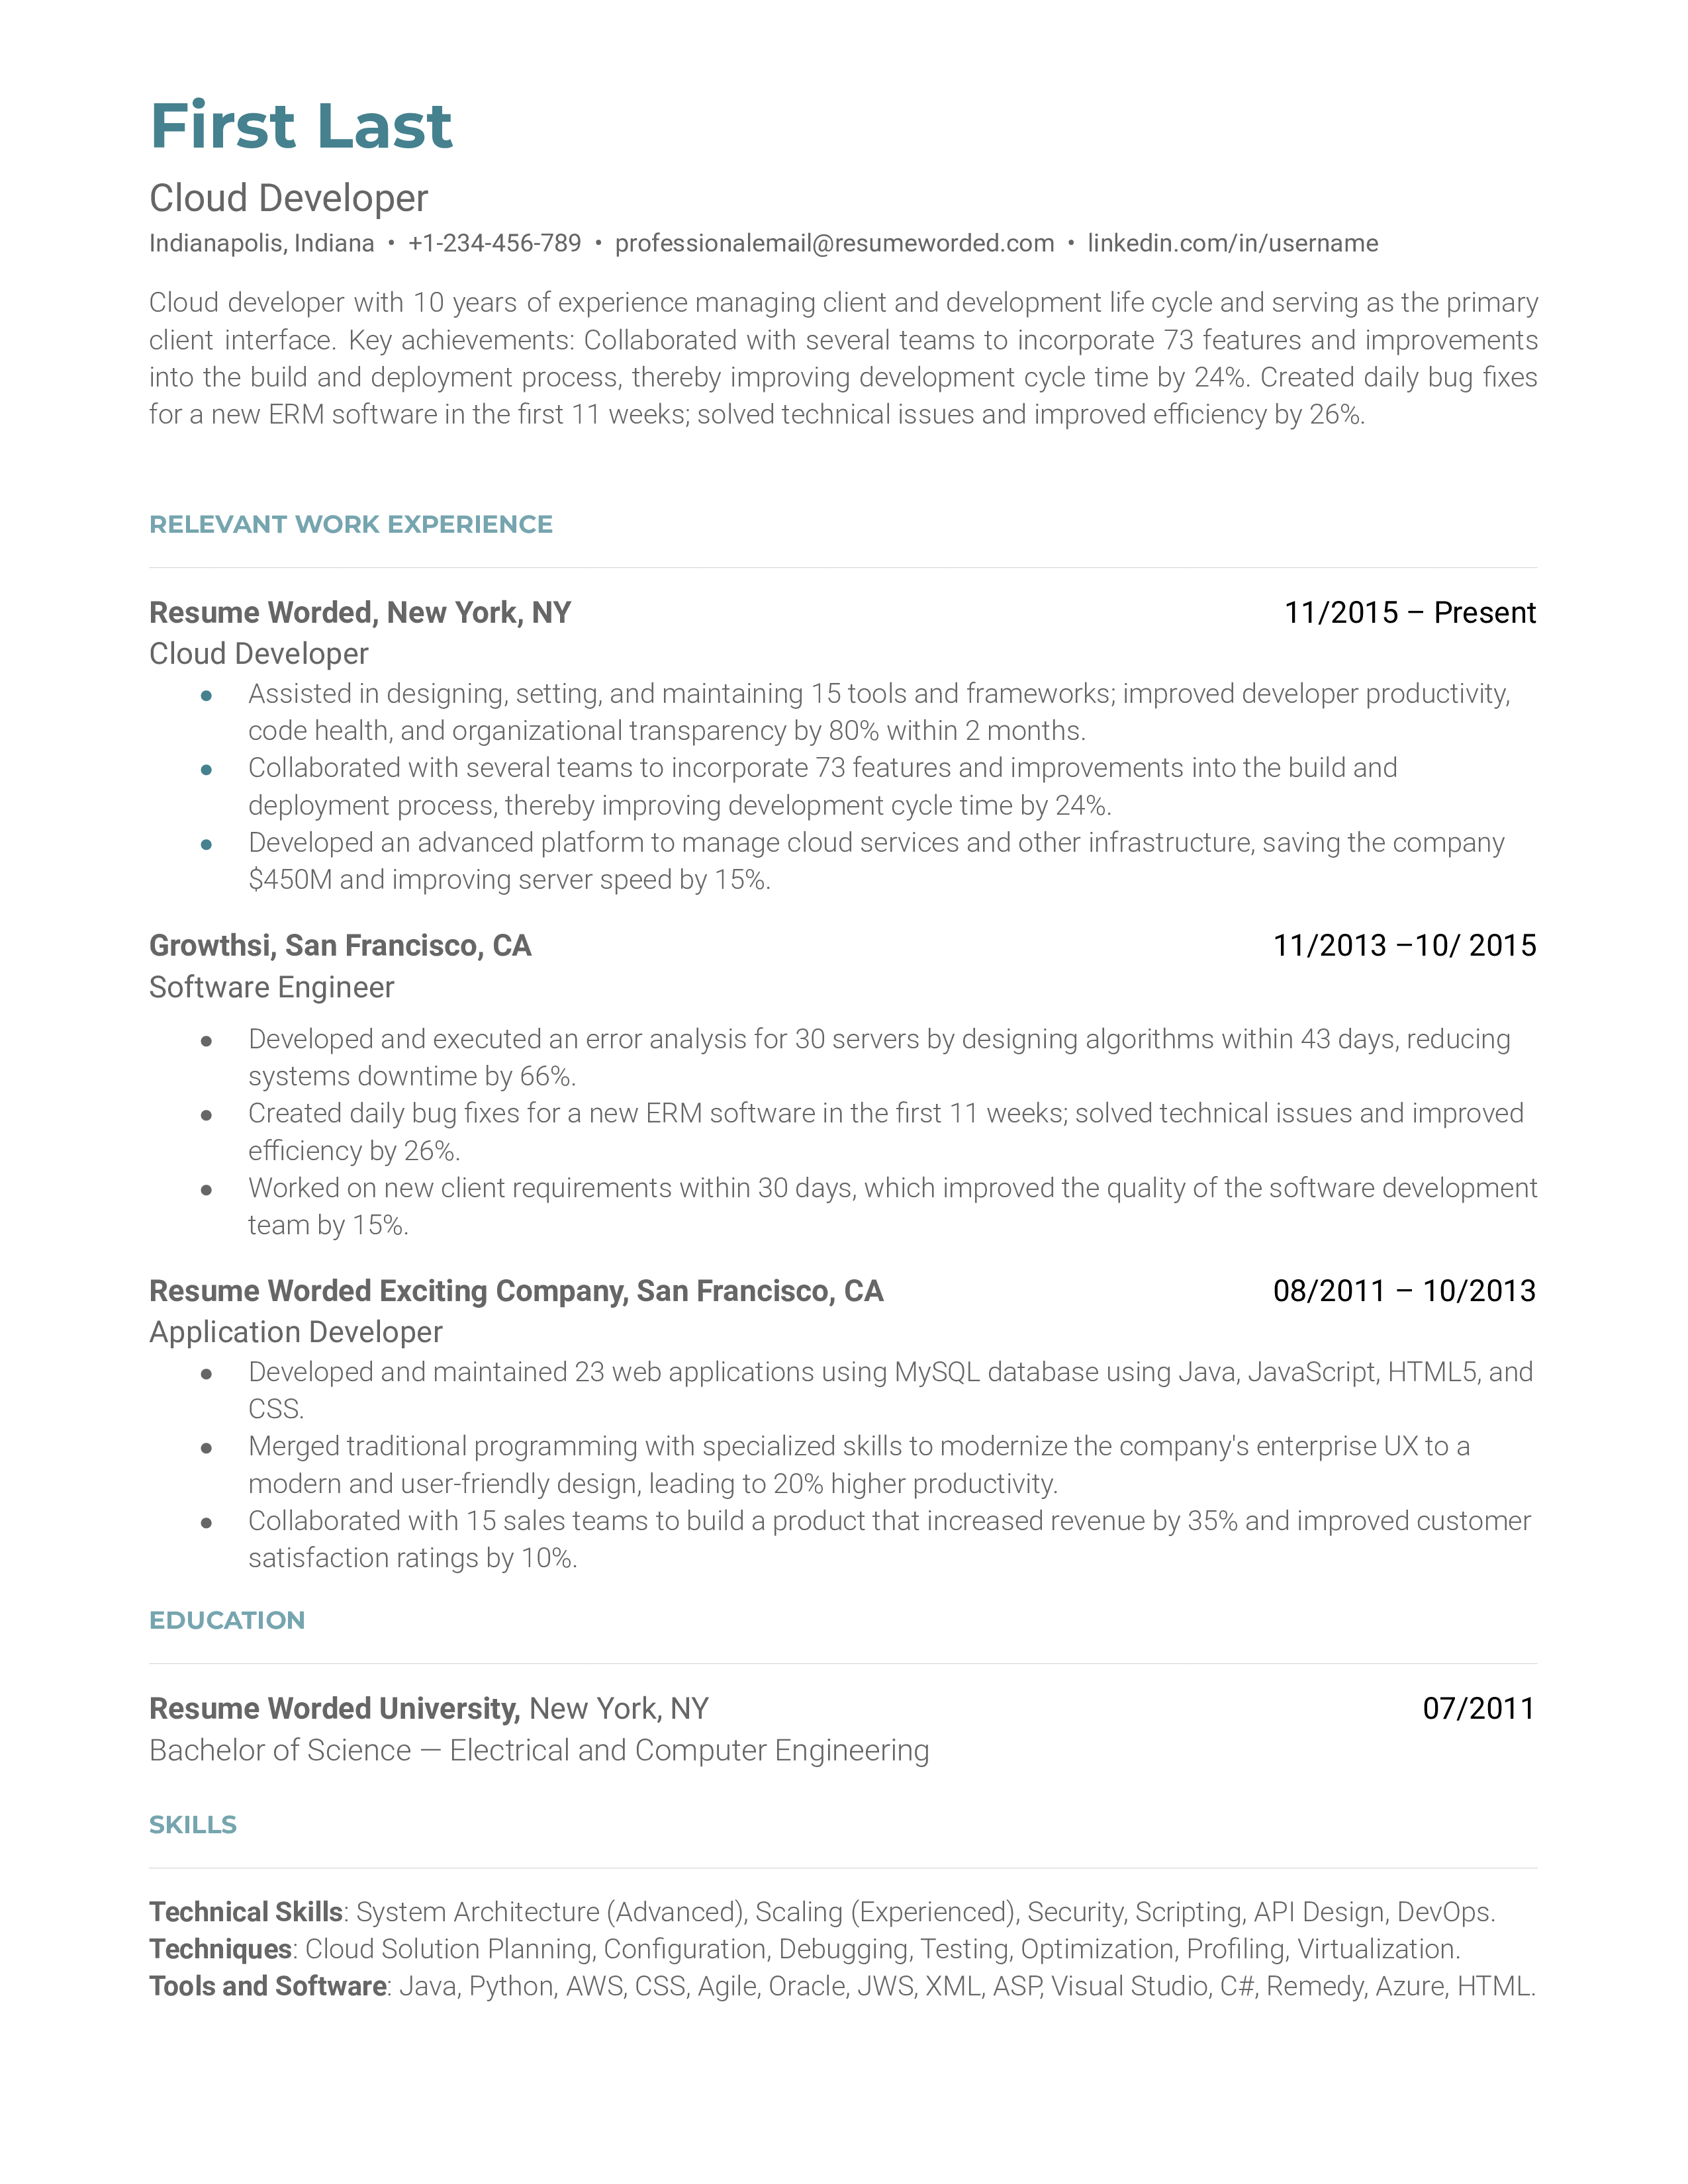 A cloud developer resume sample that highlights the applicant’s technical experience and skill set.